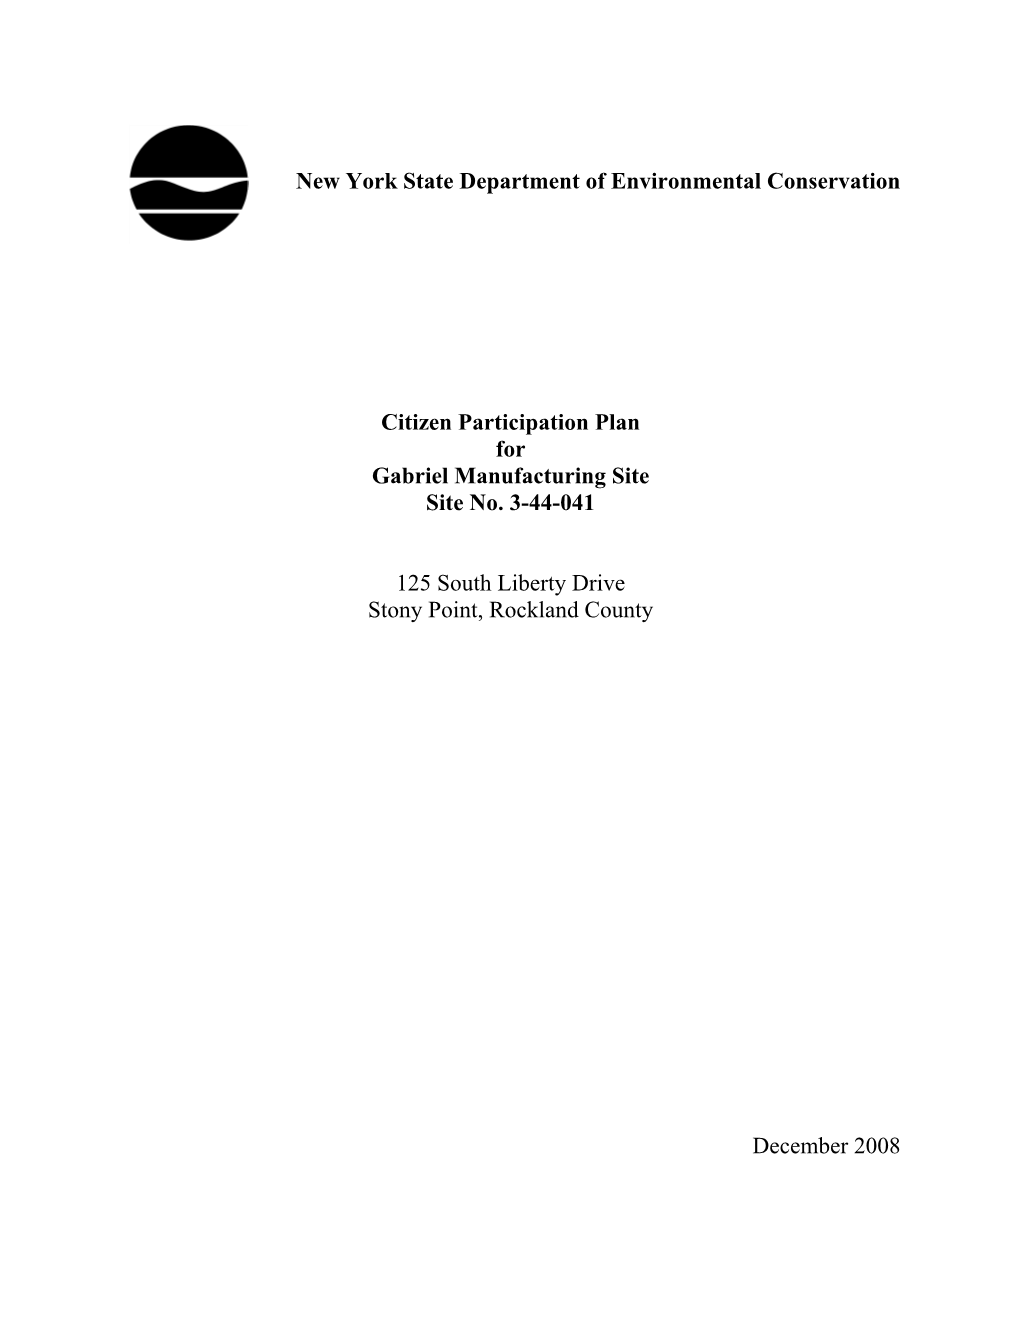 New York State Department of Environmental Conservation Citizen Participation Plan for Gabriel Manufacturing Site Site No. 3-44